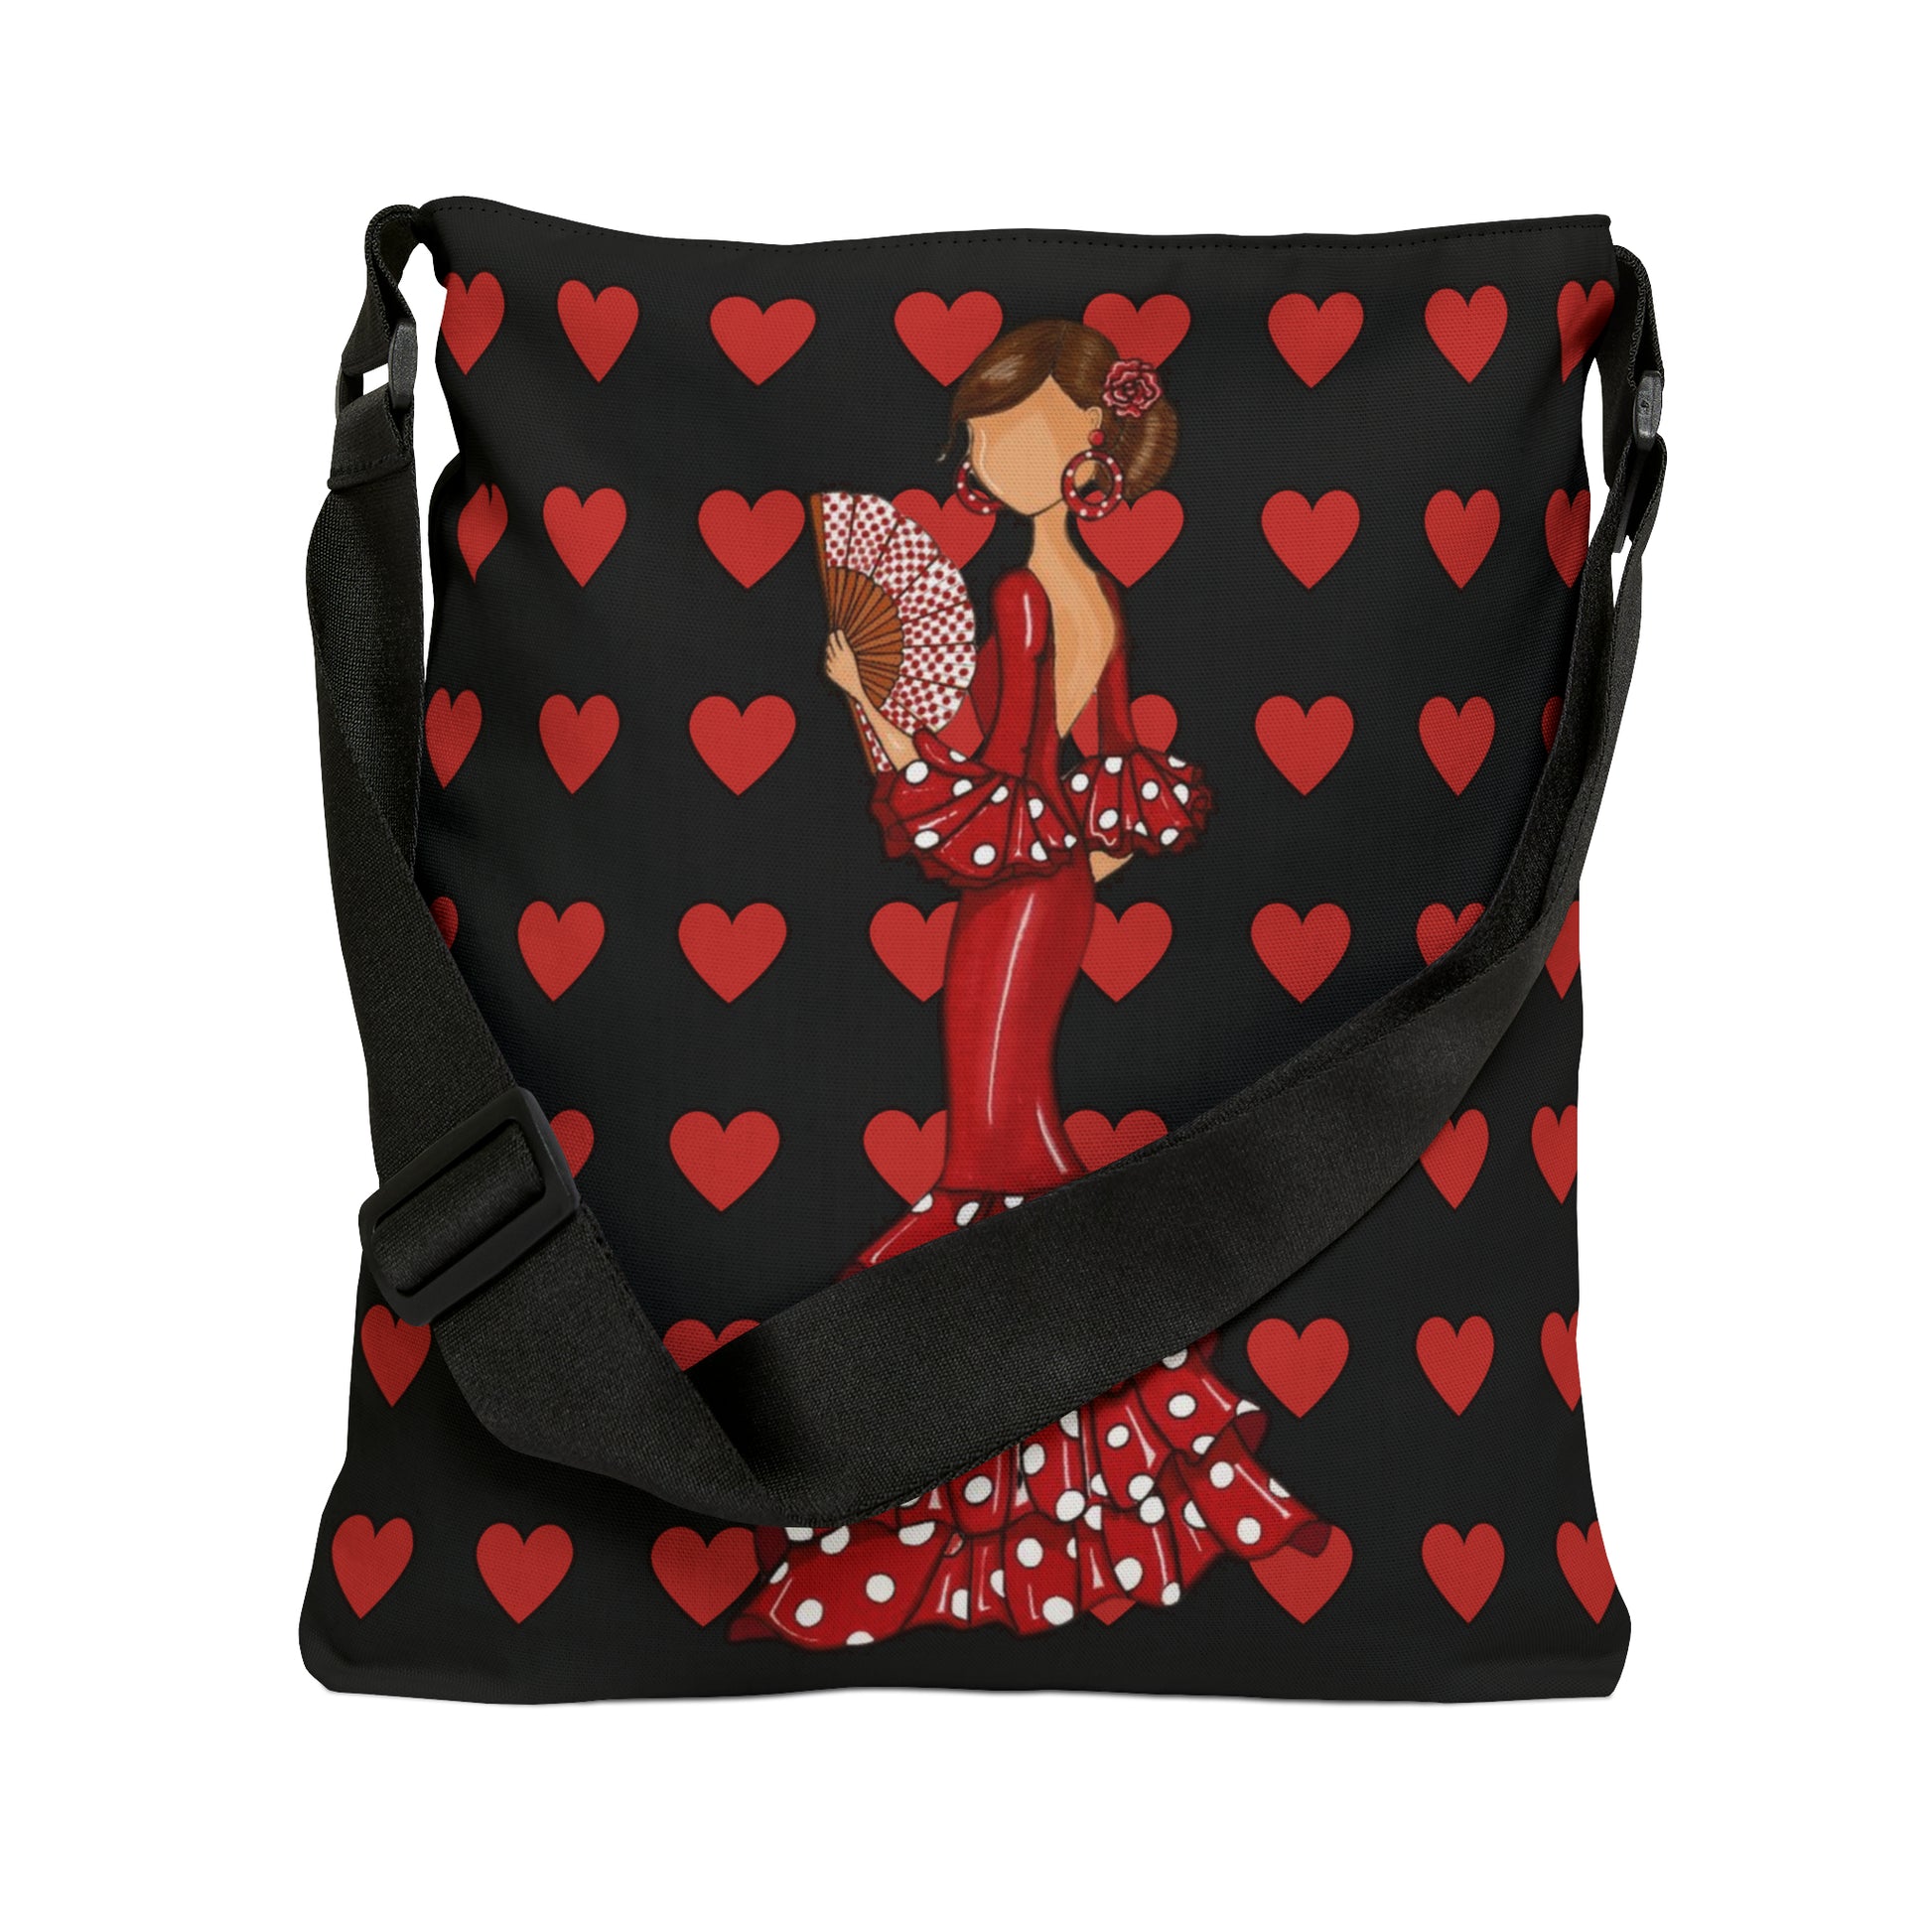 a red and black bag with hearts on it